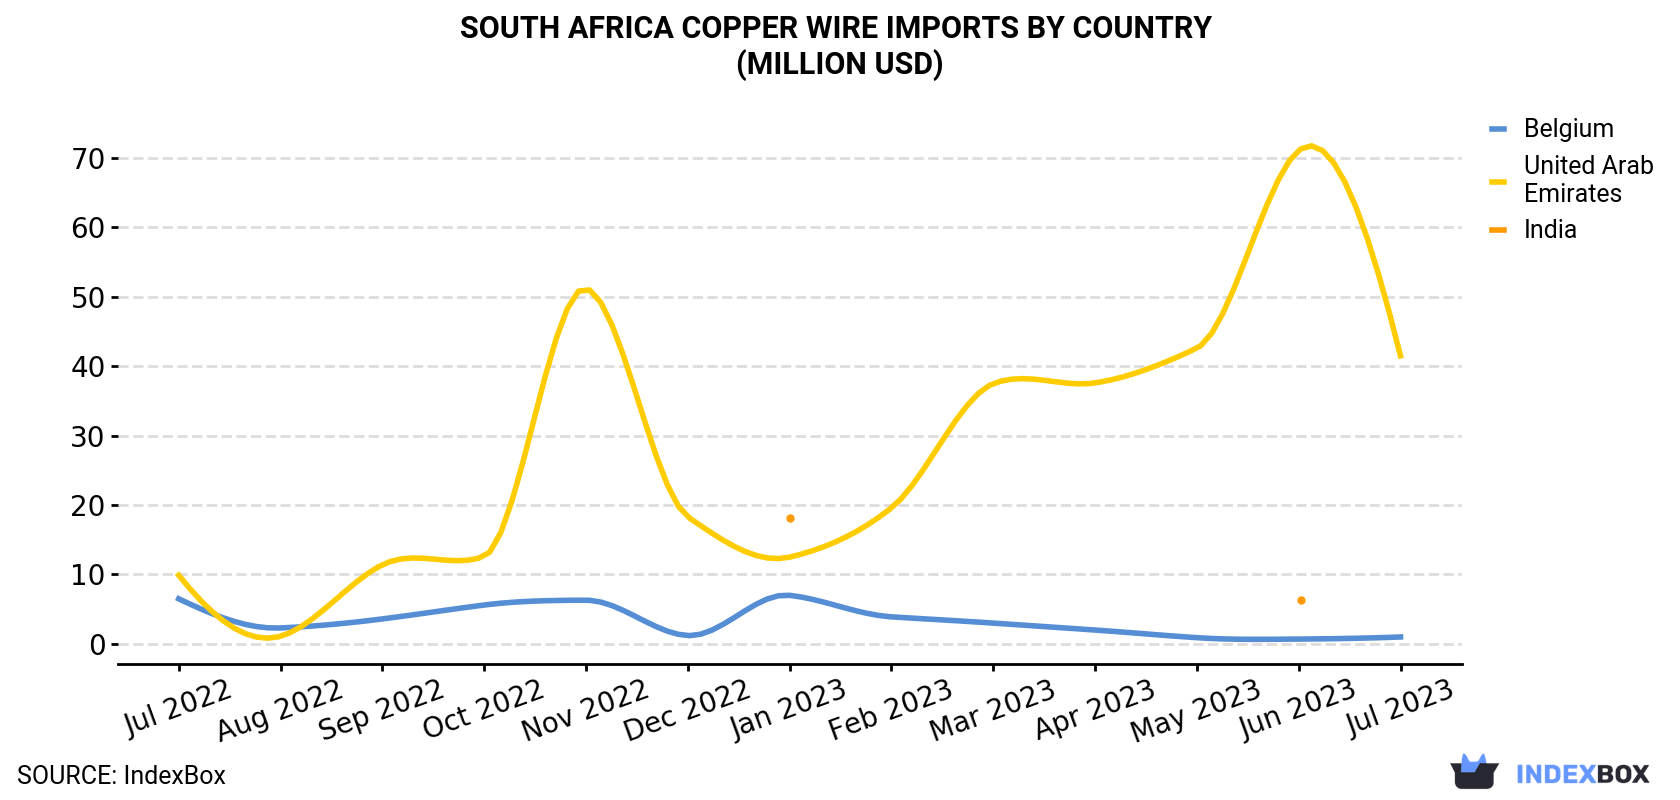 South Africa Copper Wire Imports By Country (Million USD)